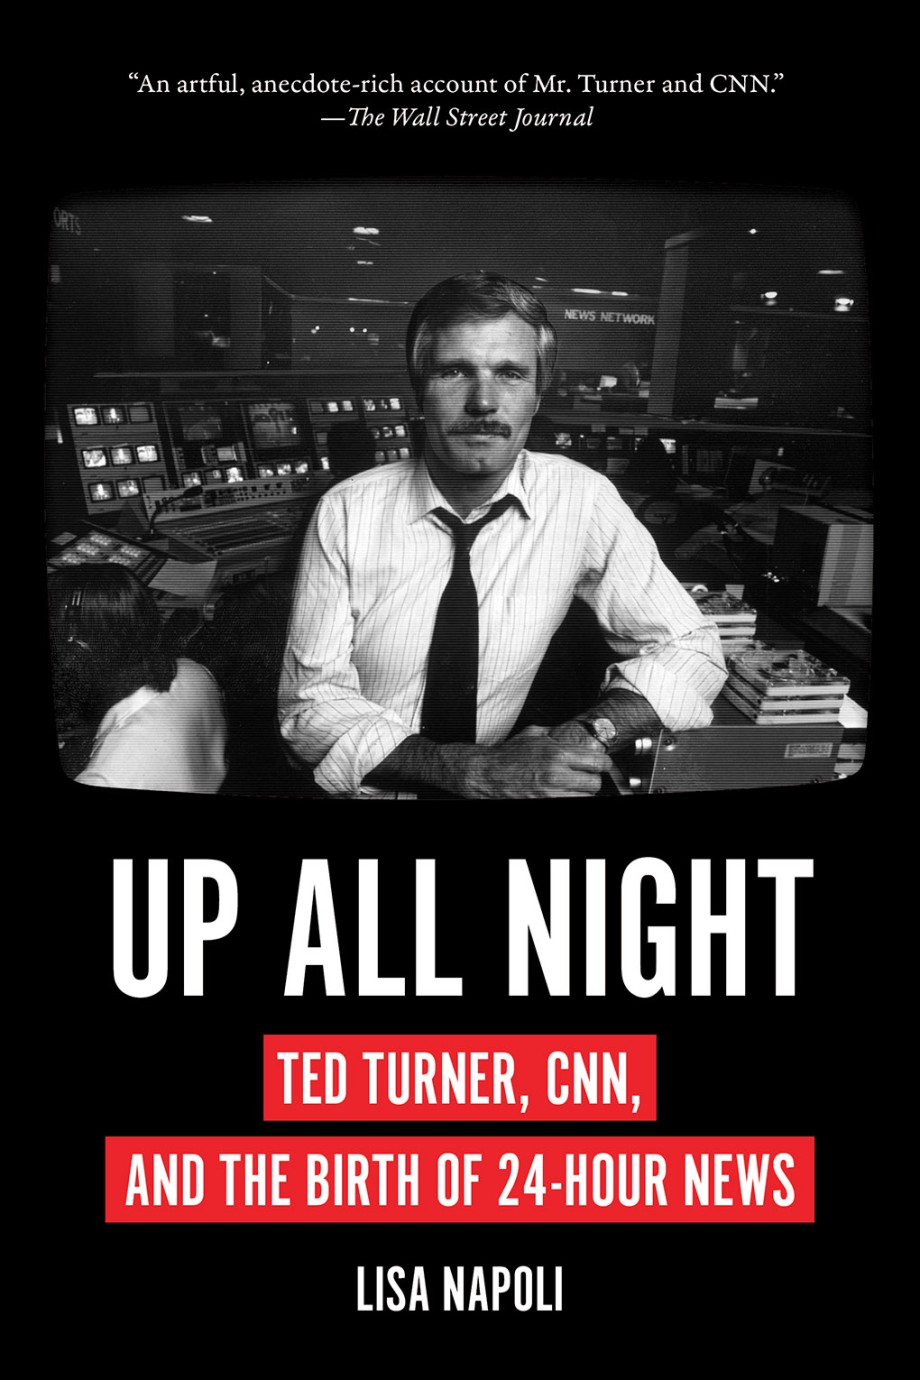 Up All Night Ted Turner, CNN, and the Birth of 24-Hour News